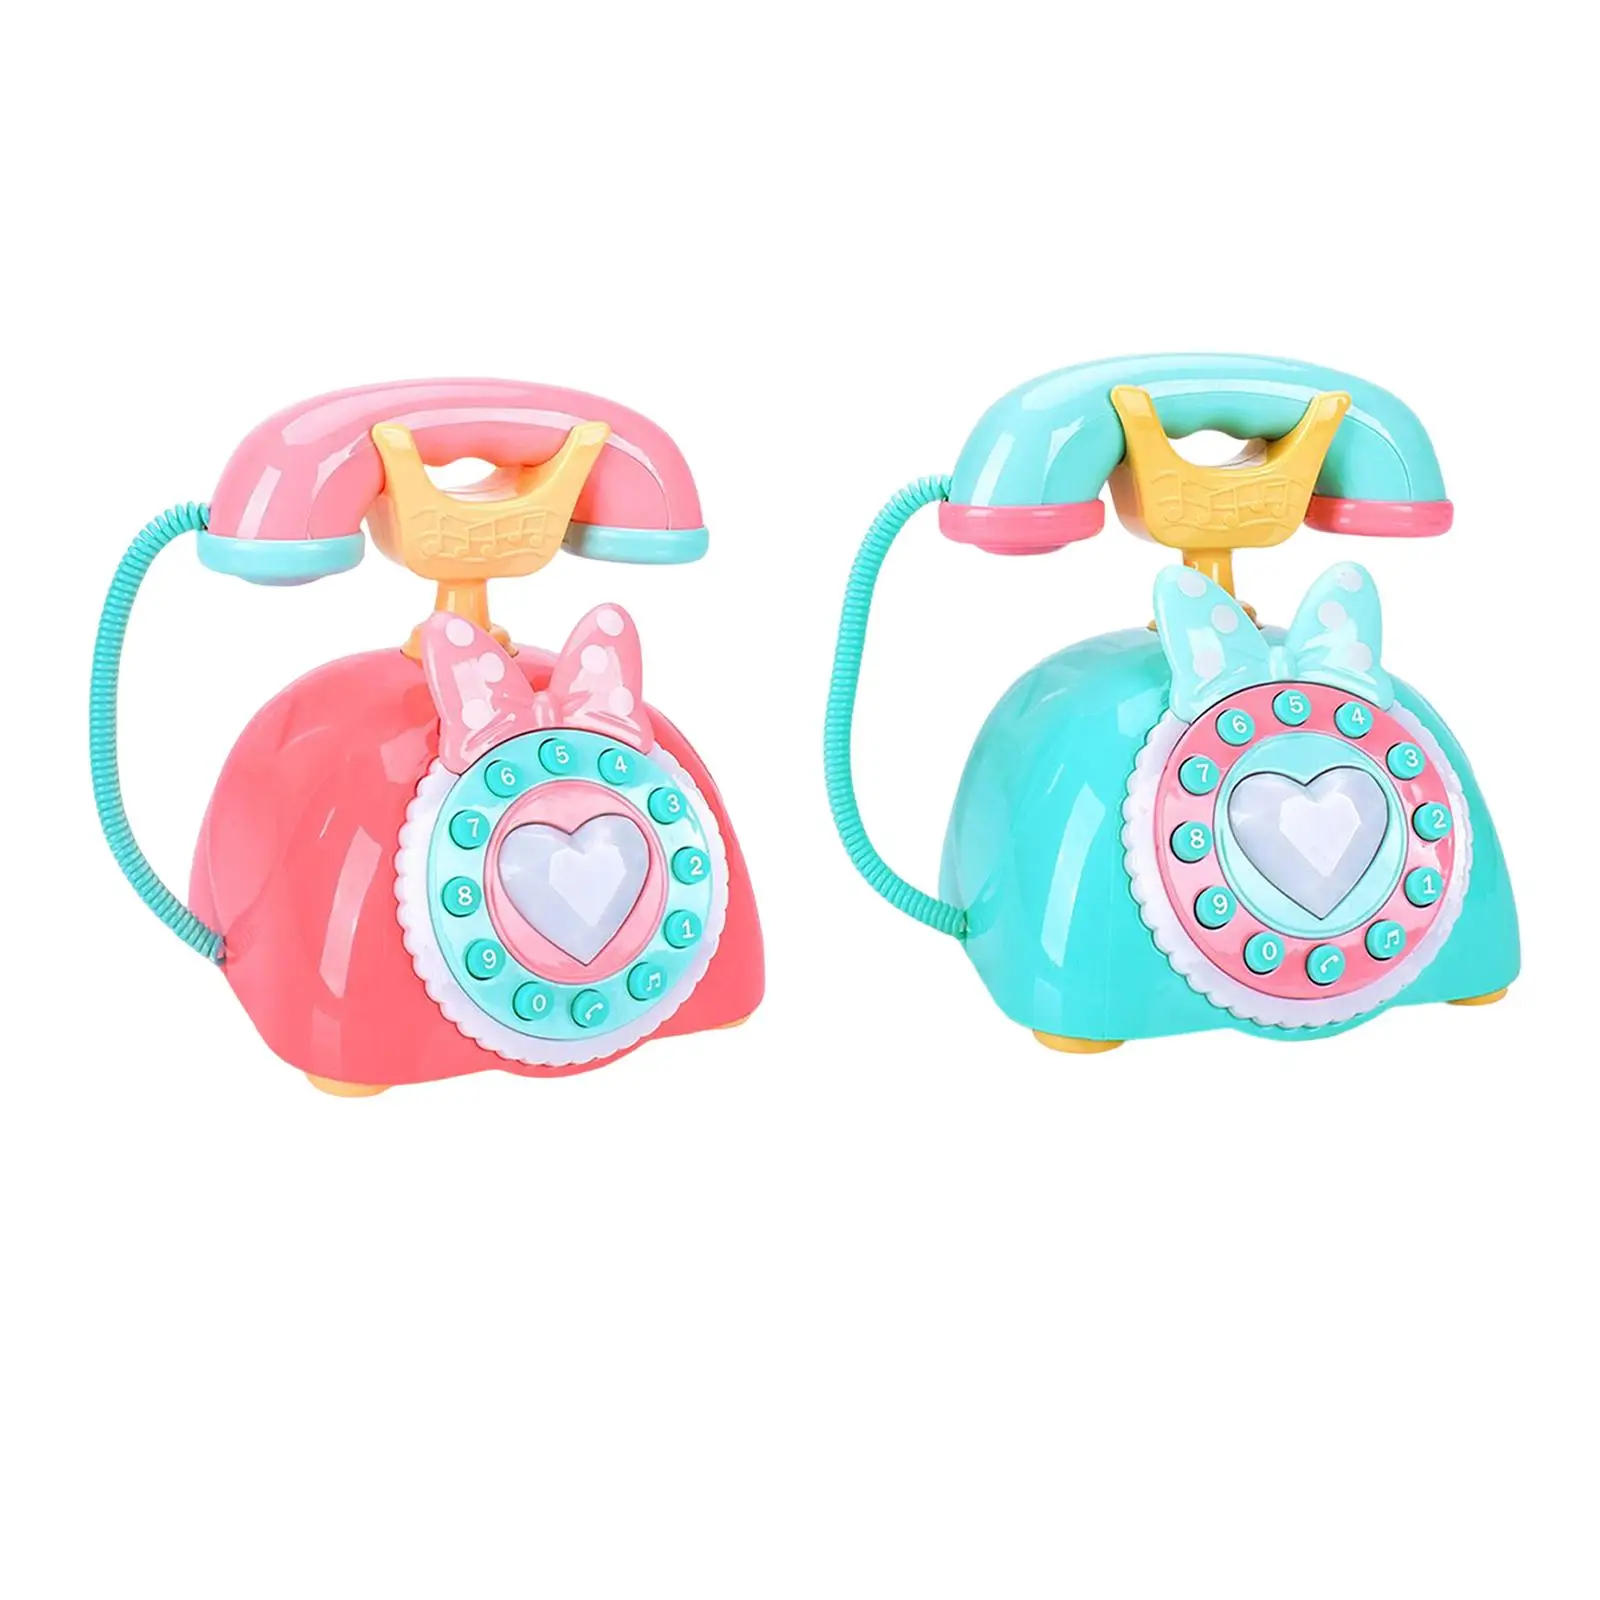 Retro Telephone Toy Educational Simulated Landline Development Develop Multifunction Baby Musical Toys for Kids 3+ Preschool